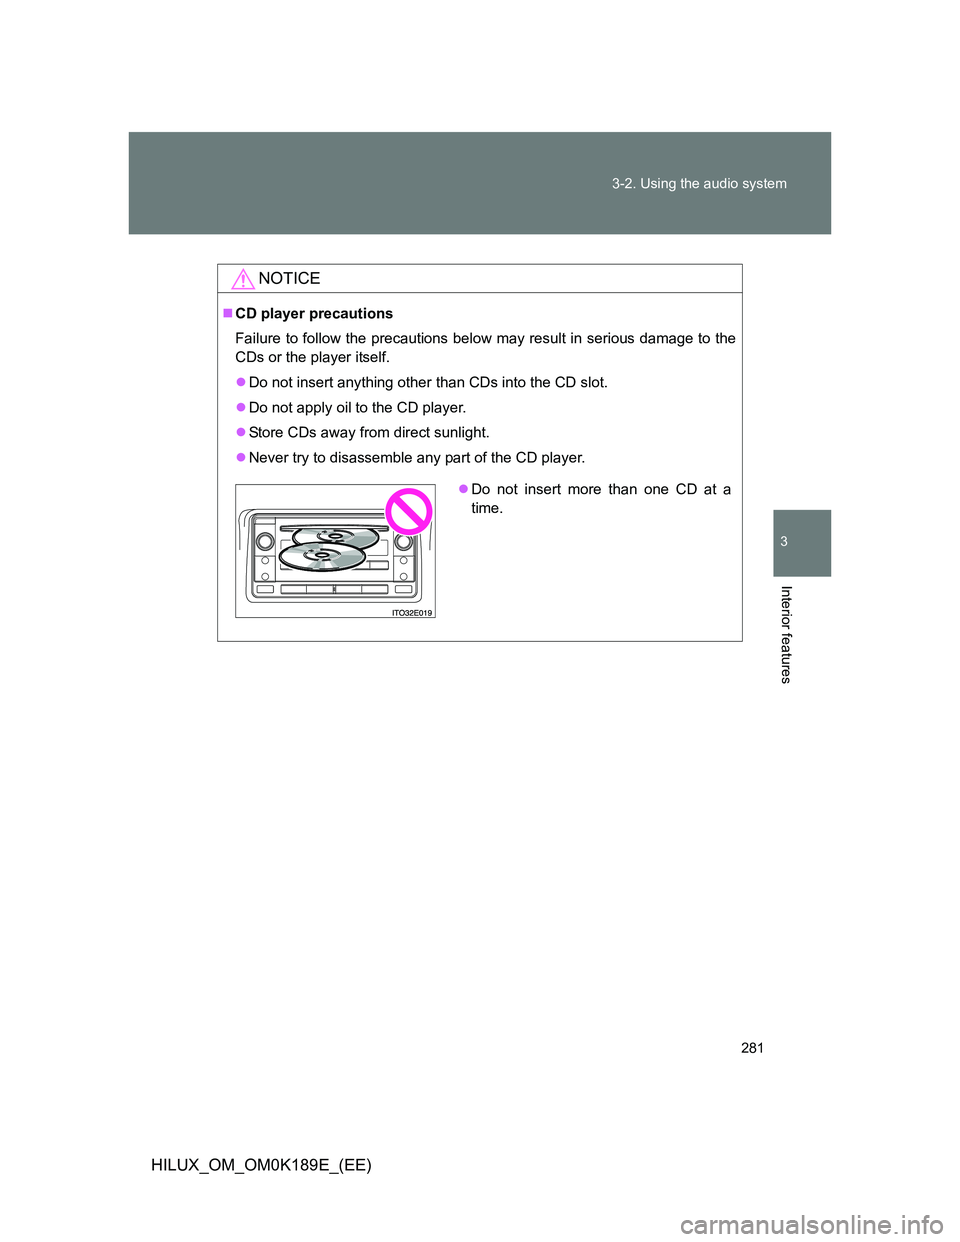 TOYOTA HILUX 2013  Owners Manual (in English) 281 3-2. Using the audio system
3
Interior features
HILUX_OM_OM0K189E_(EE)
NOTICE
CD player precautions
Failure to follow the precautions below may result in serious damage to the
CDs or the player